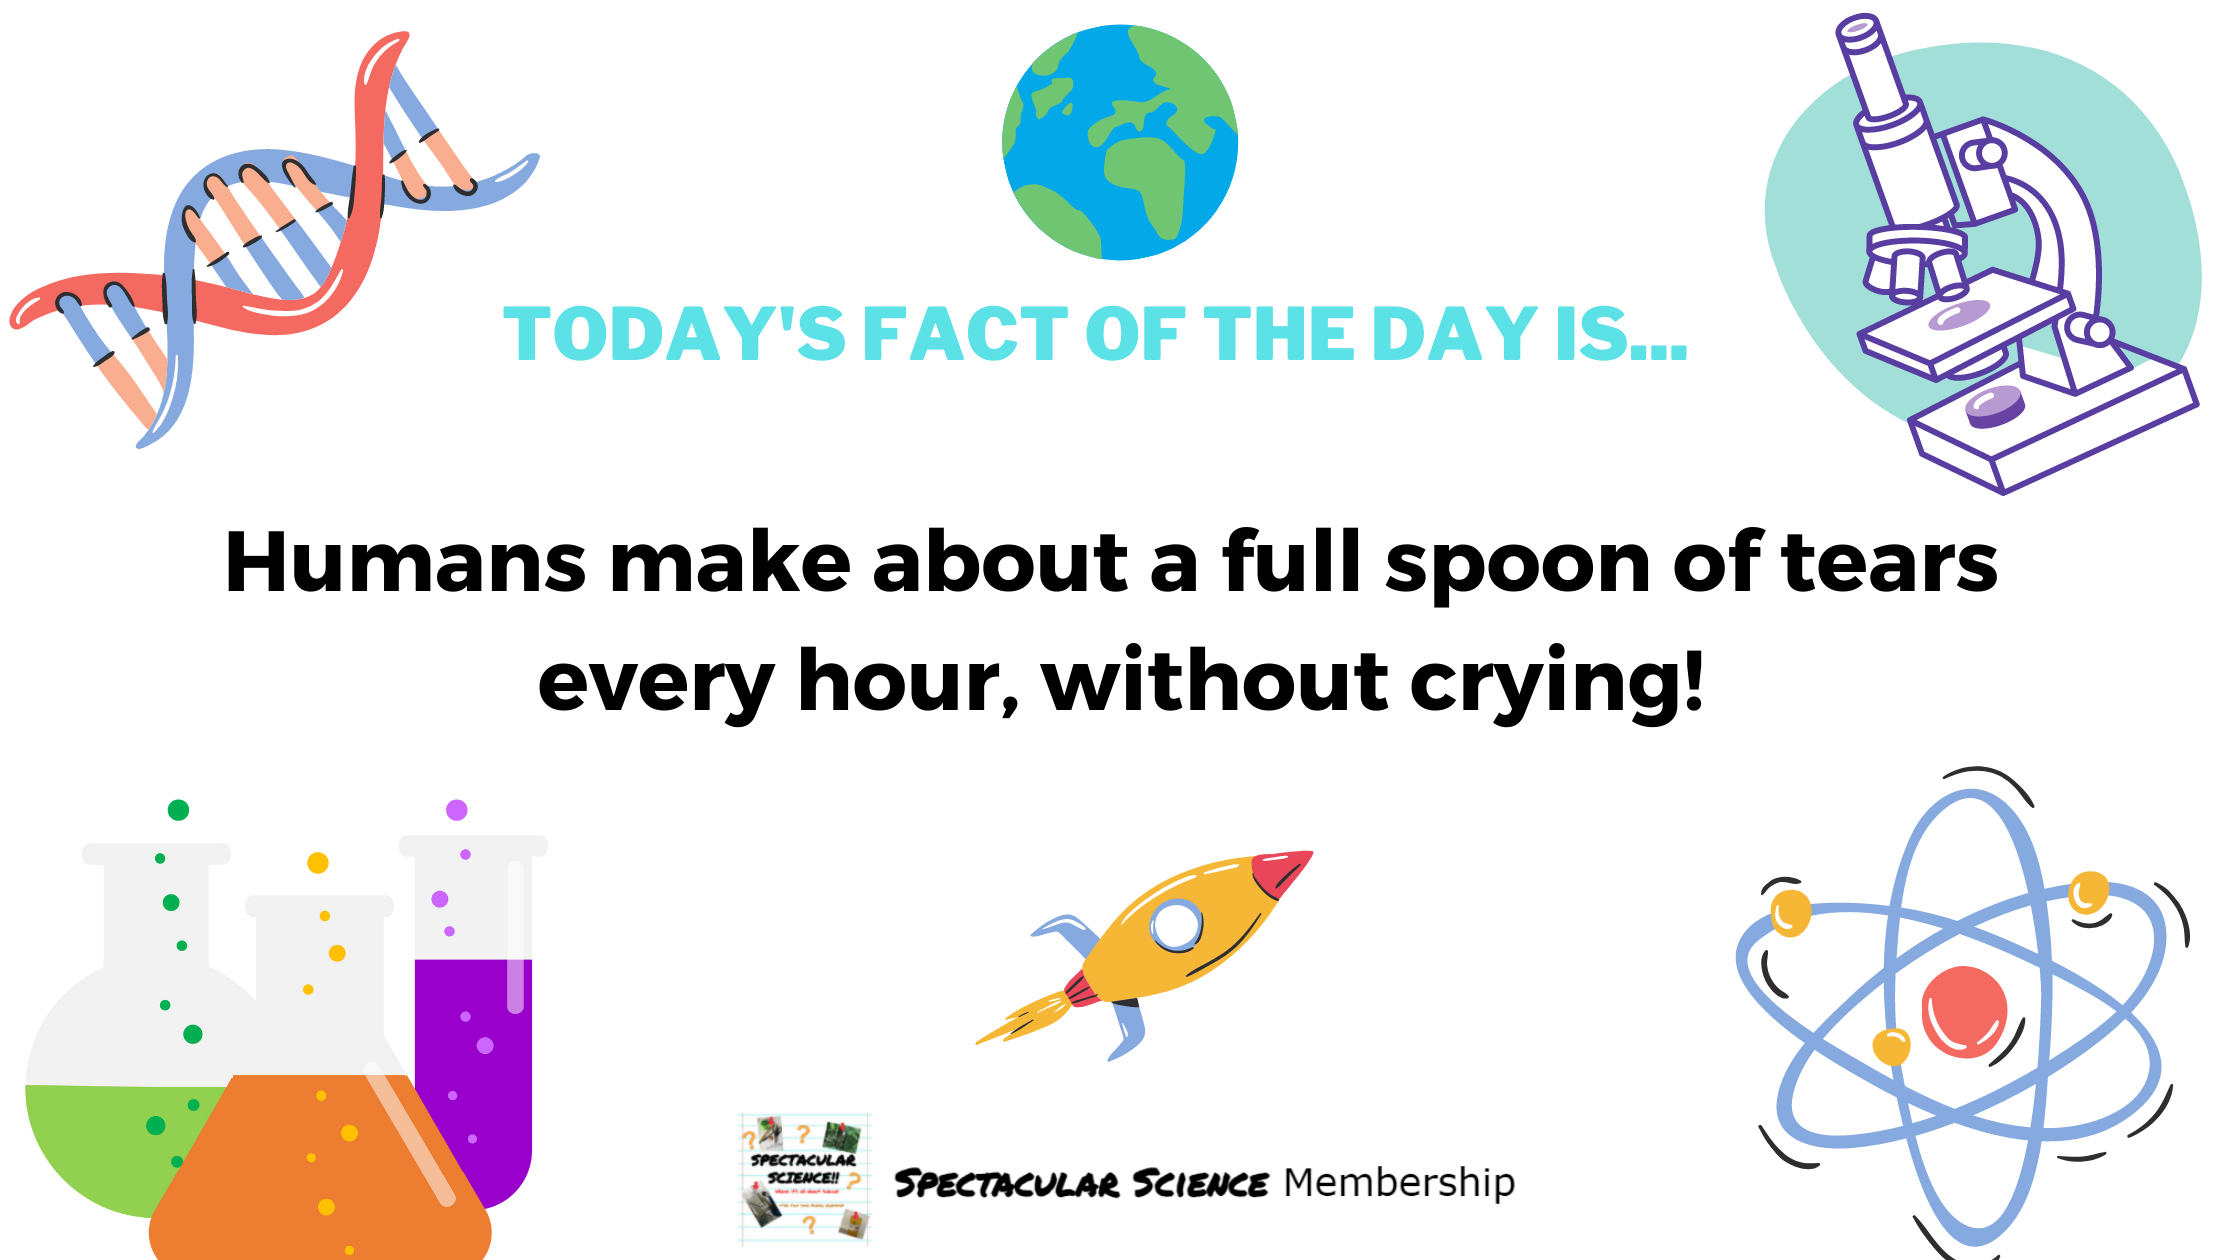 Fact of the Day Image Nov. 30th